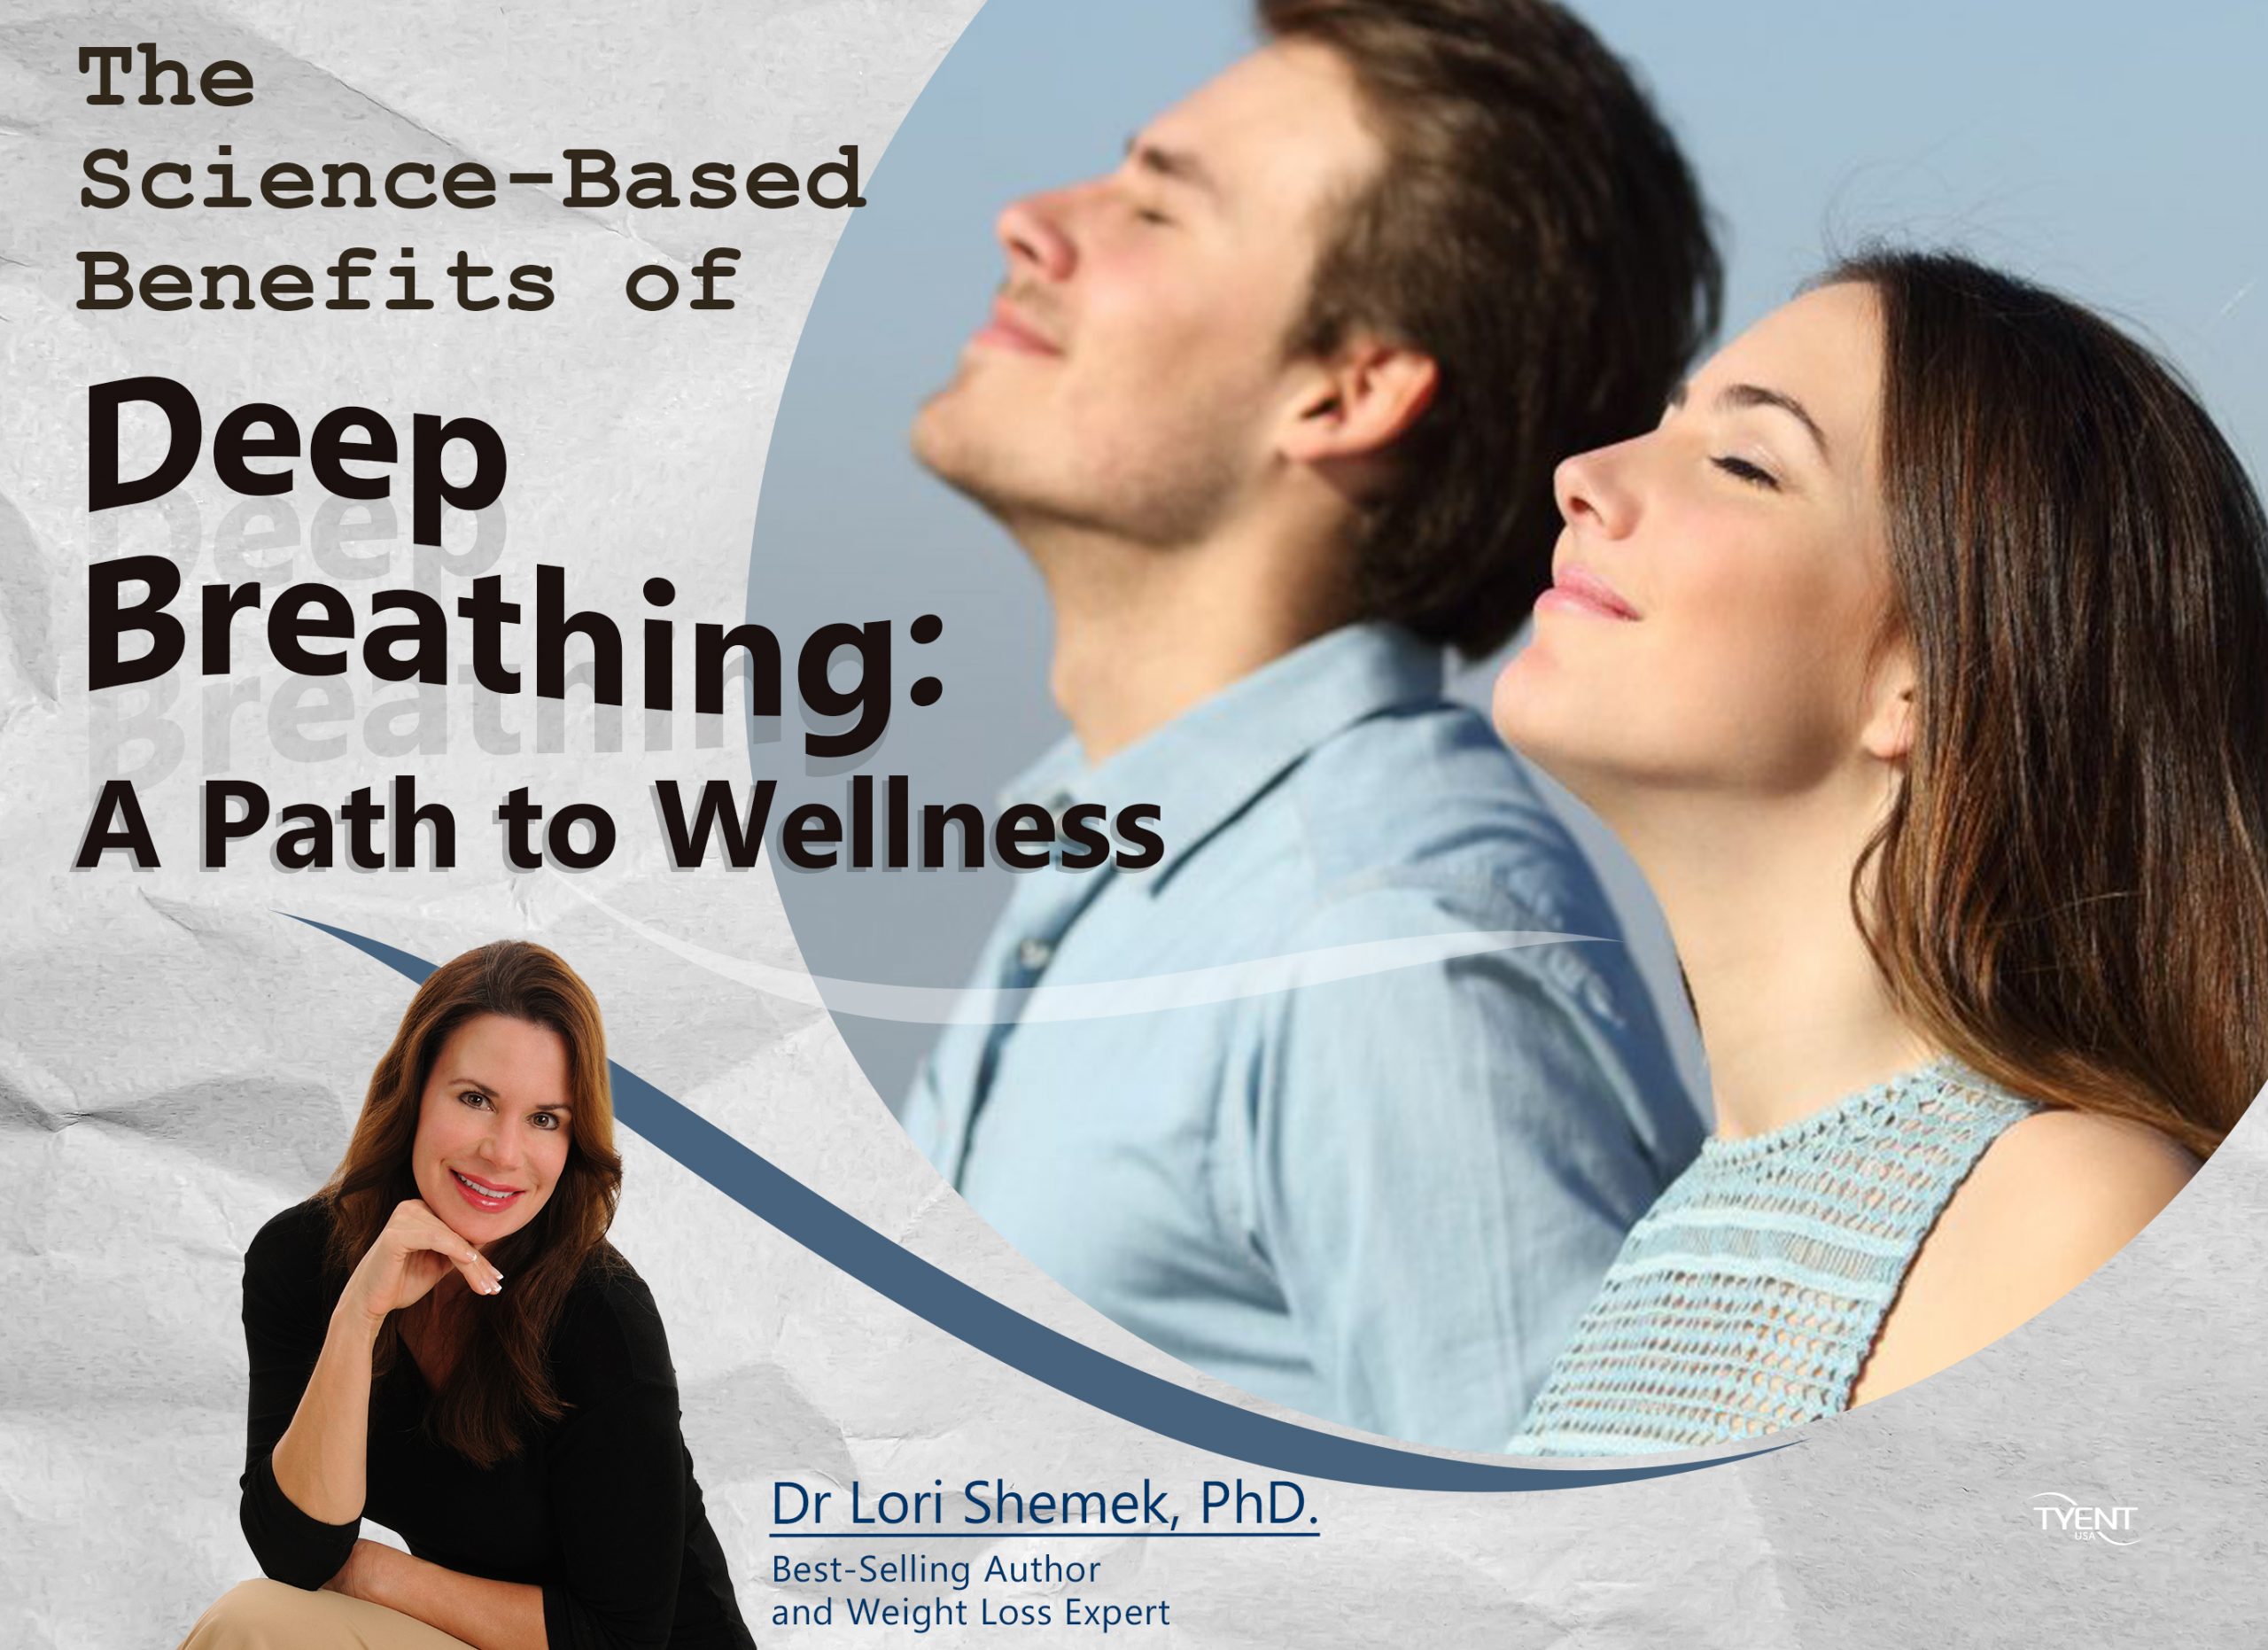 The Science-Based Benefits of Deep Breathing